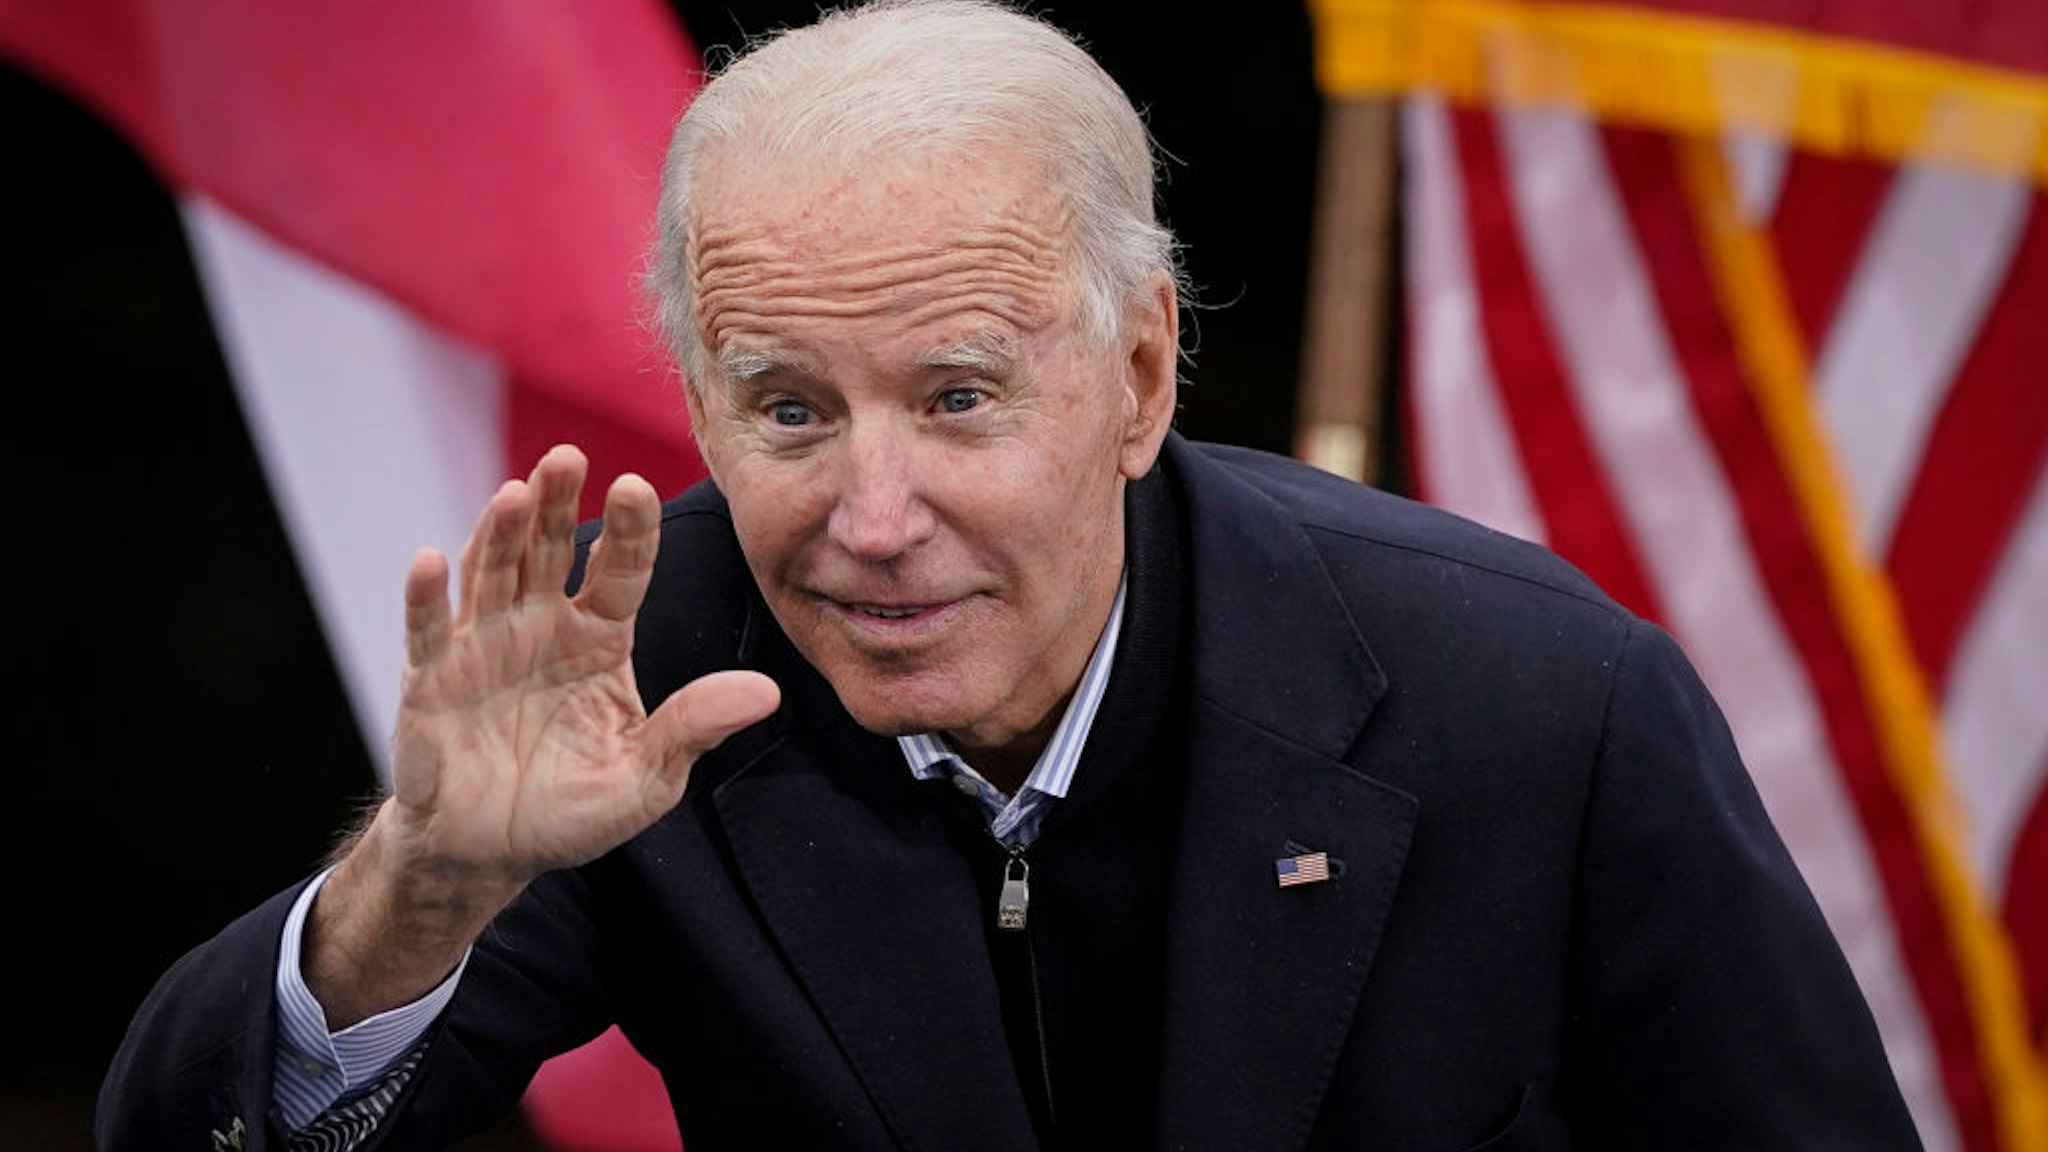 U.S. President-elect Joe Biden gestures to the crowd as he delivers remarks during a drive-in rally for U.S. Senate candidates Jon Ossoff and Rev. Raphael Warnock at Pullman Yard on December 15, 2020 in Atlanta, Georgia.